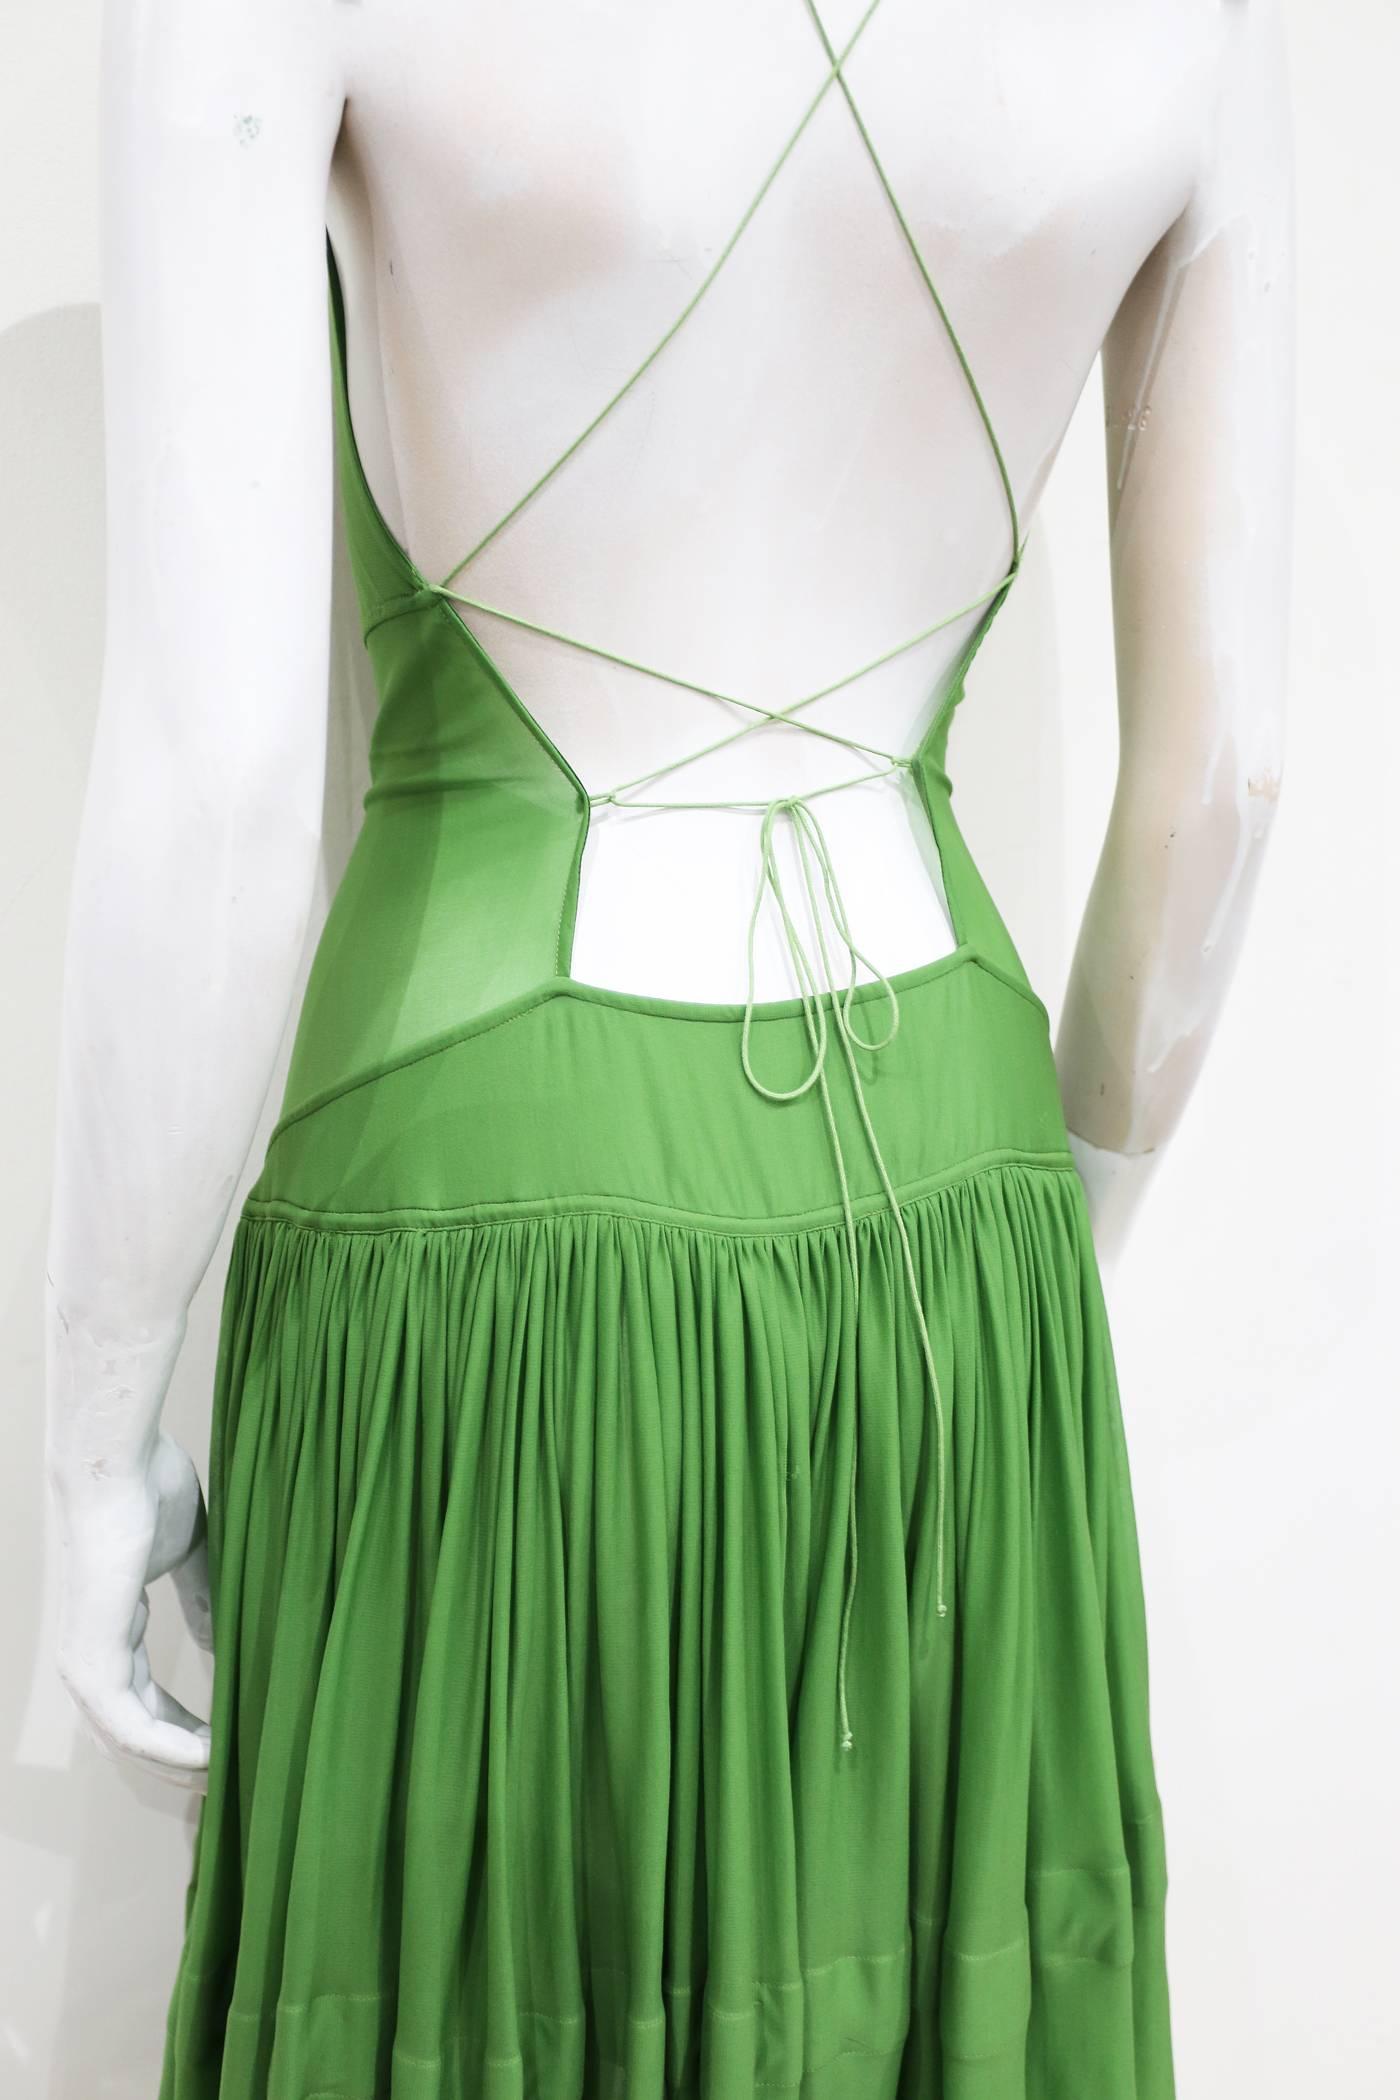 Women's Alaia green lace up pleated evening dress